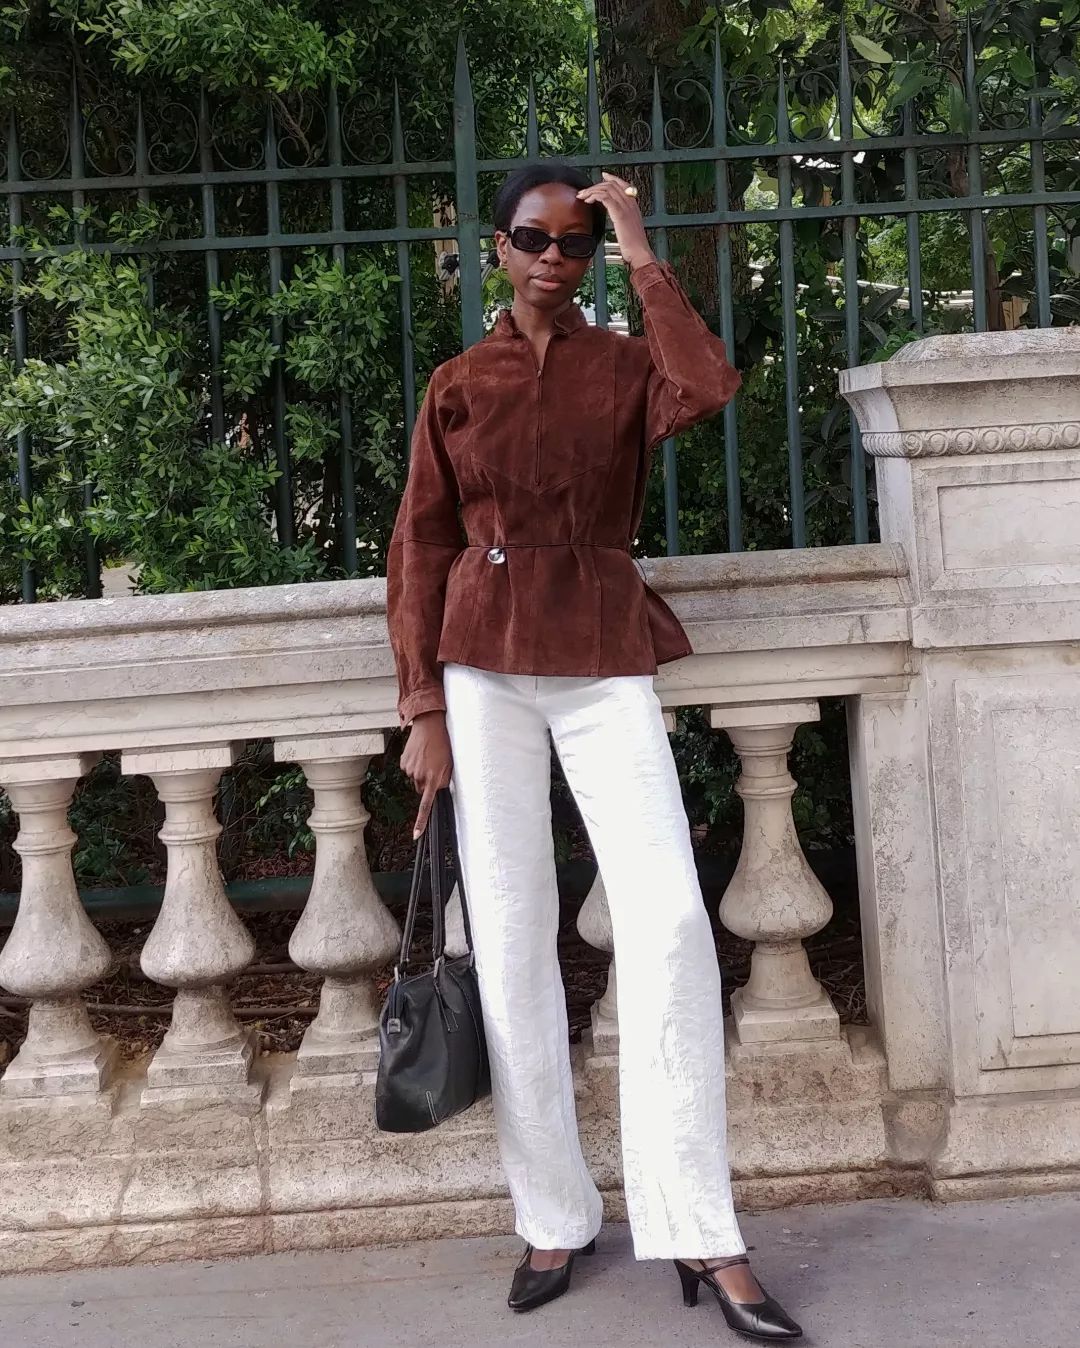 Sylvie Mus wearing a brown suede jacket with white pants.